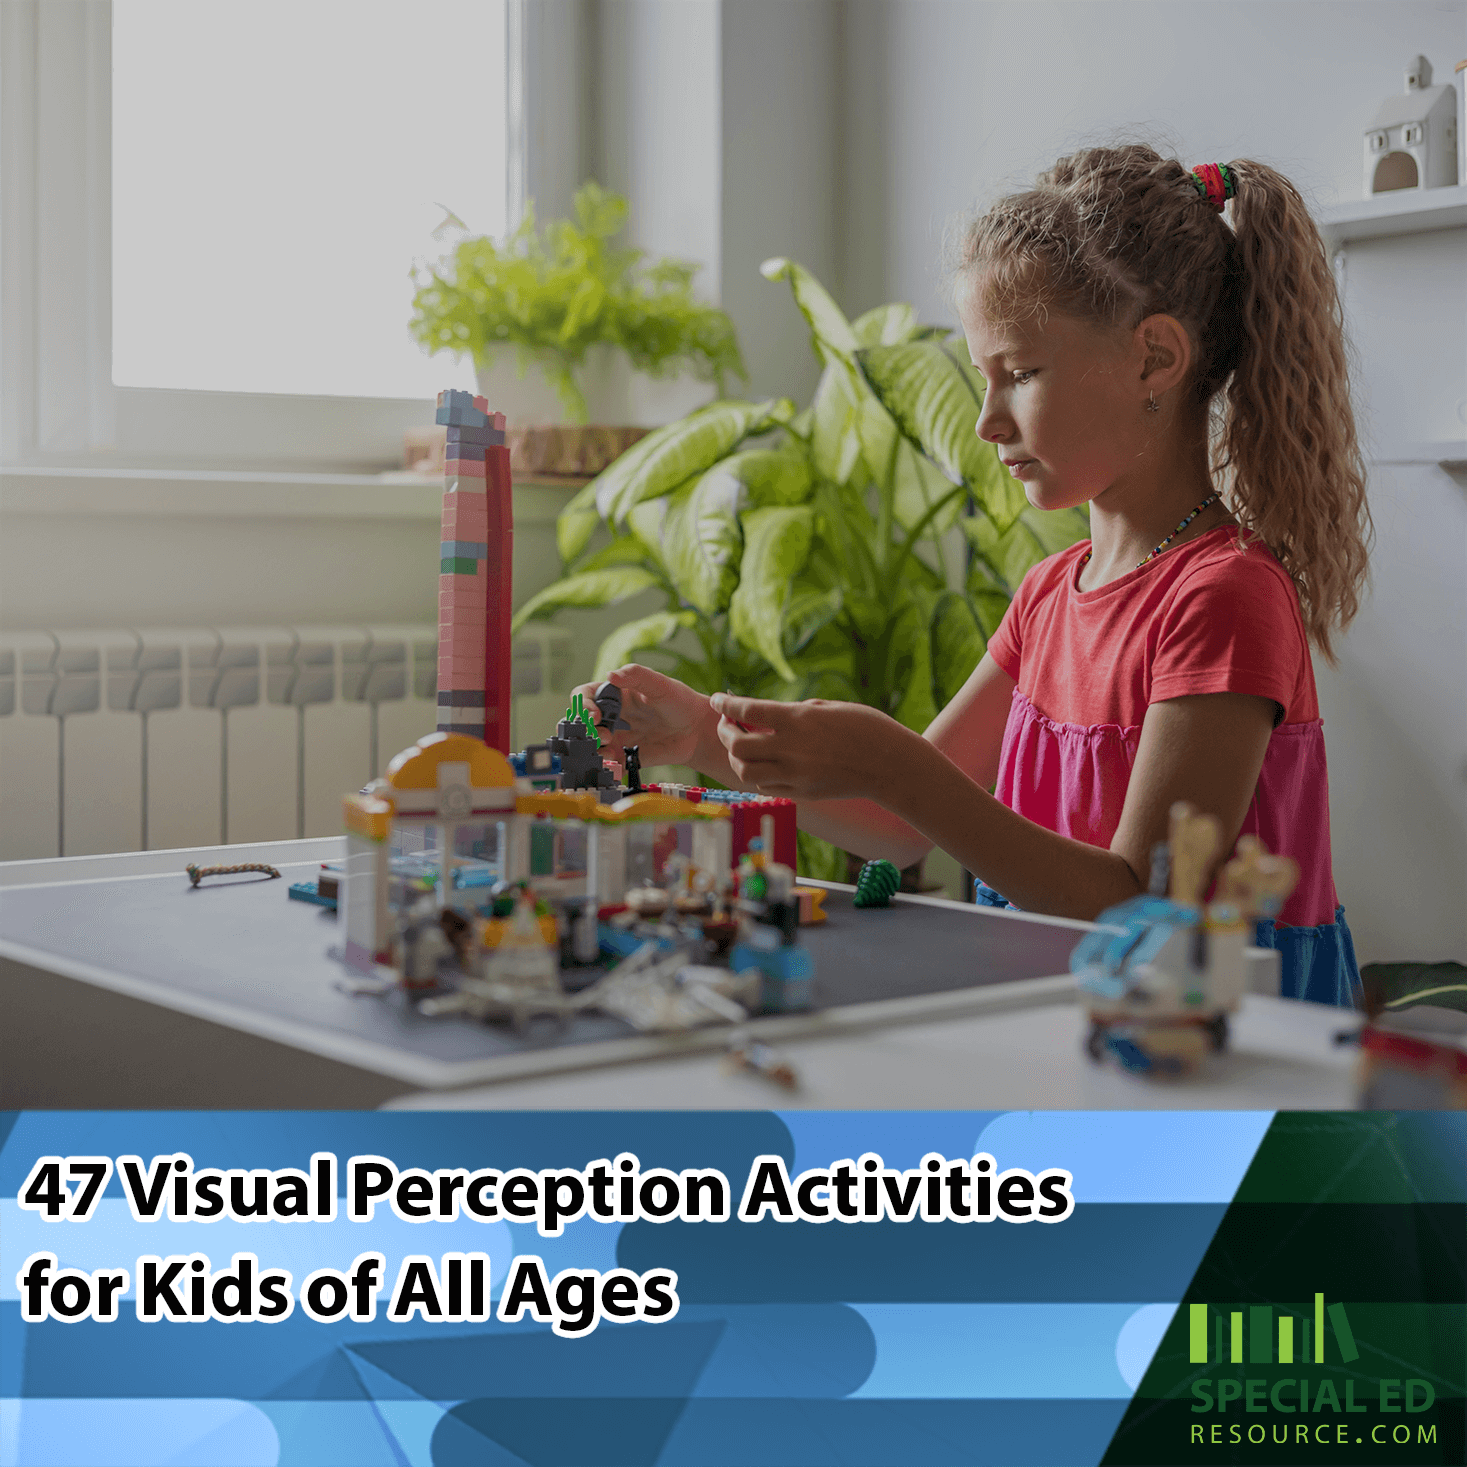 Young girl playing with colorful building blocks on a table, with plants in the background. Text overlay reads "47 Visual Perception Activities for Kids of All Ages" with a logo for Special Ed Resource at the bottom right corner